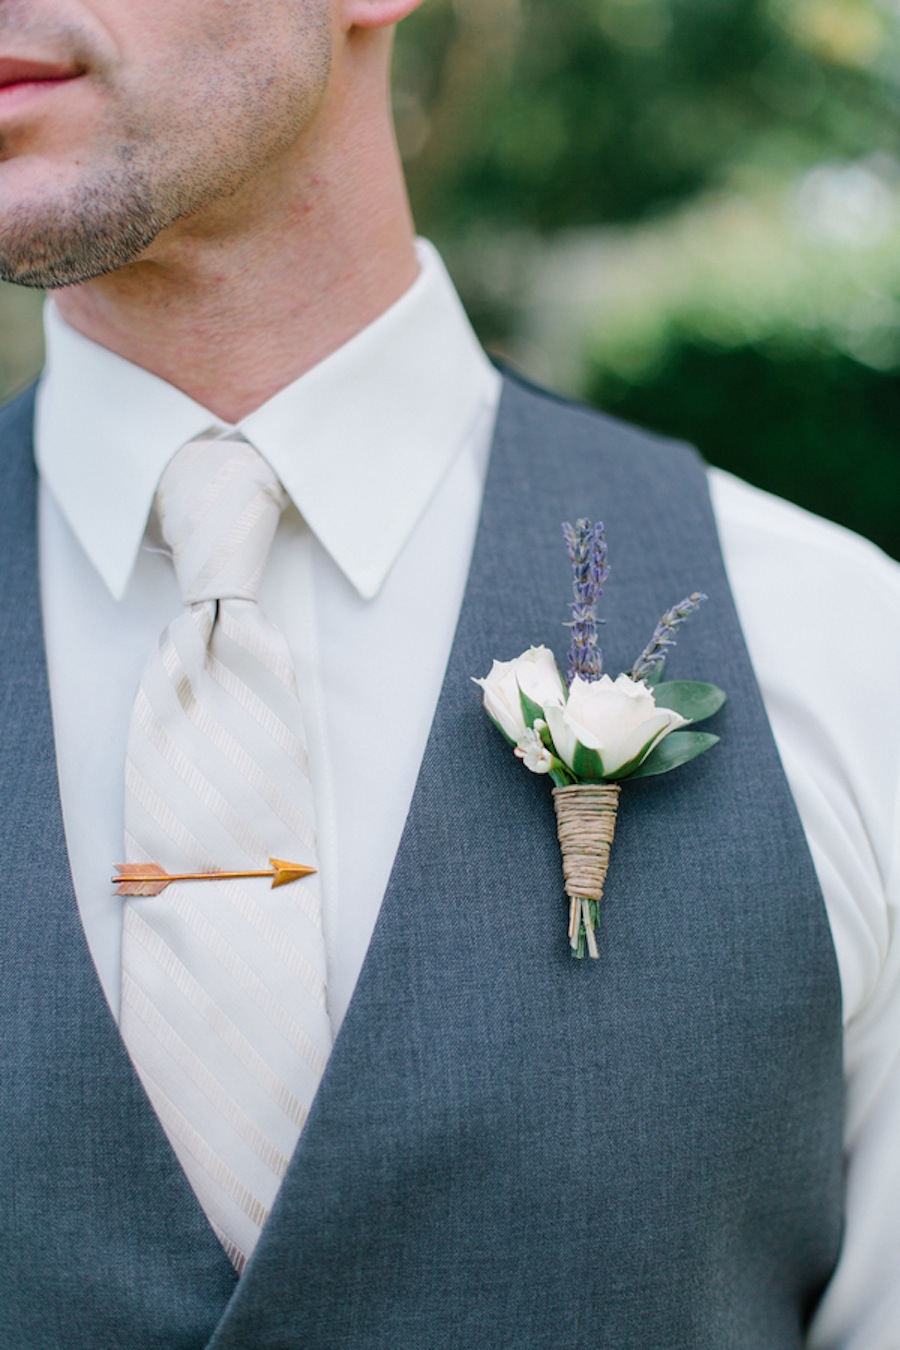 Grey Groomsmen Suit with Arrow Pin and Vintage Boutonniere